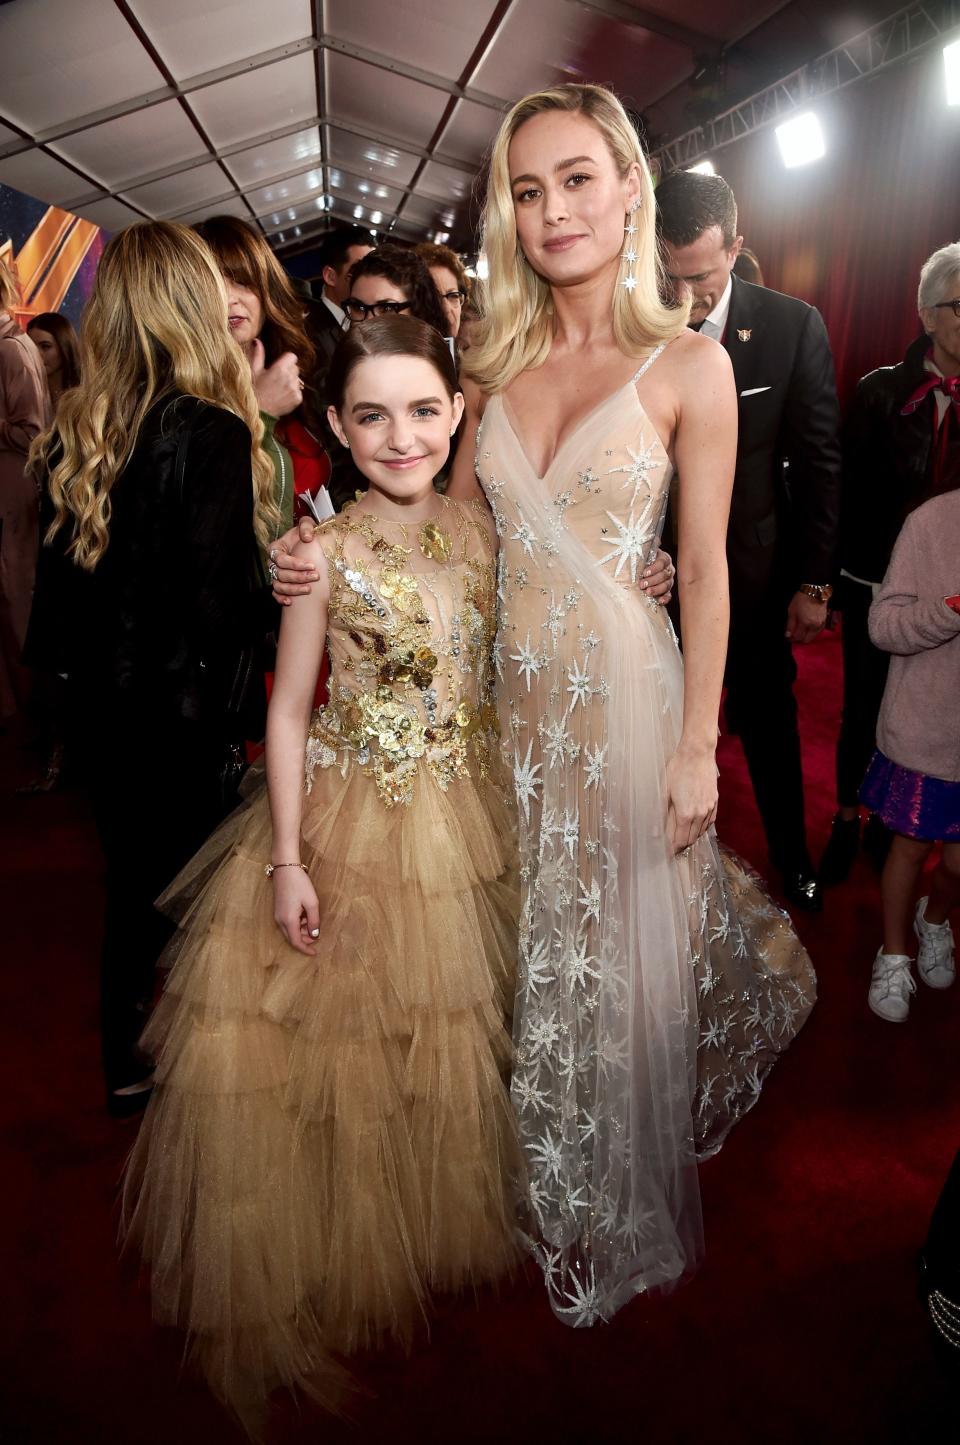 Grace and Brie Larson at the premiere of Marvel Studios' Captain Marvel in Hollywood on March 4, 2019